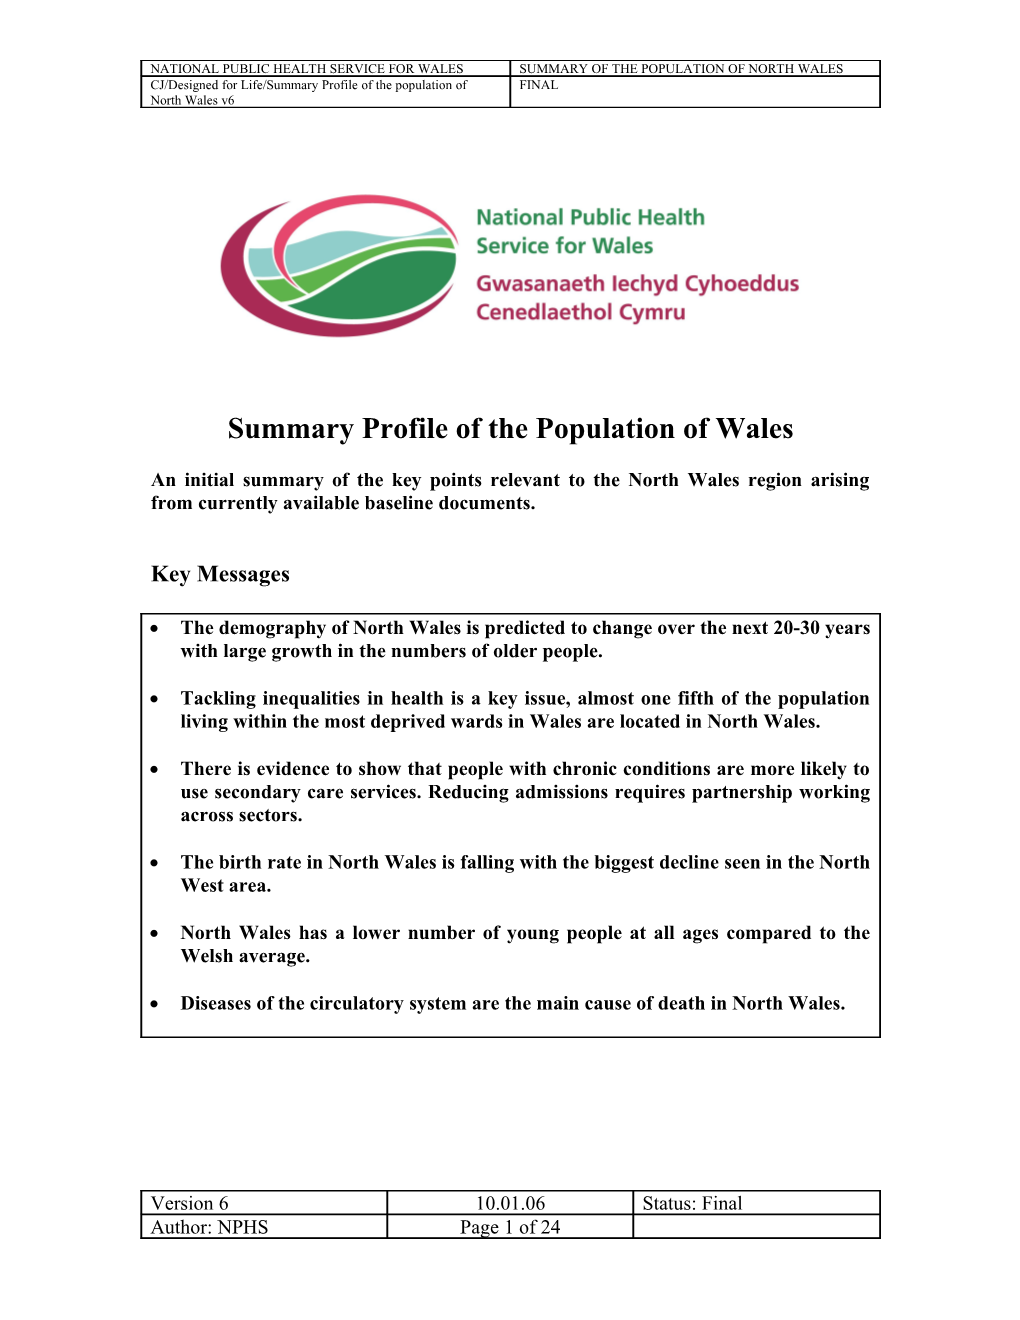 Summary Profile of the Population of Wales